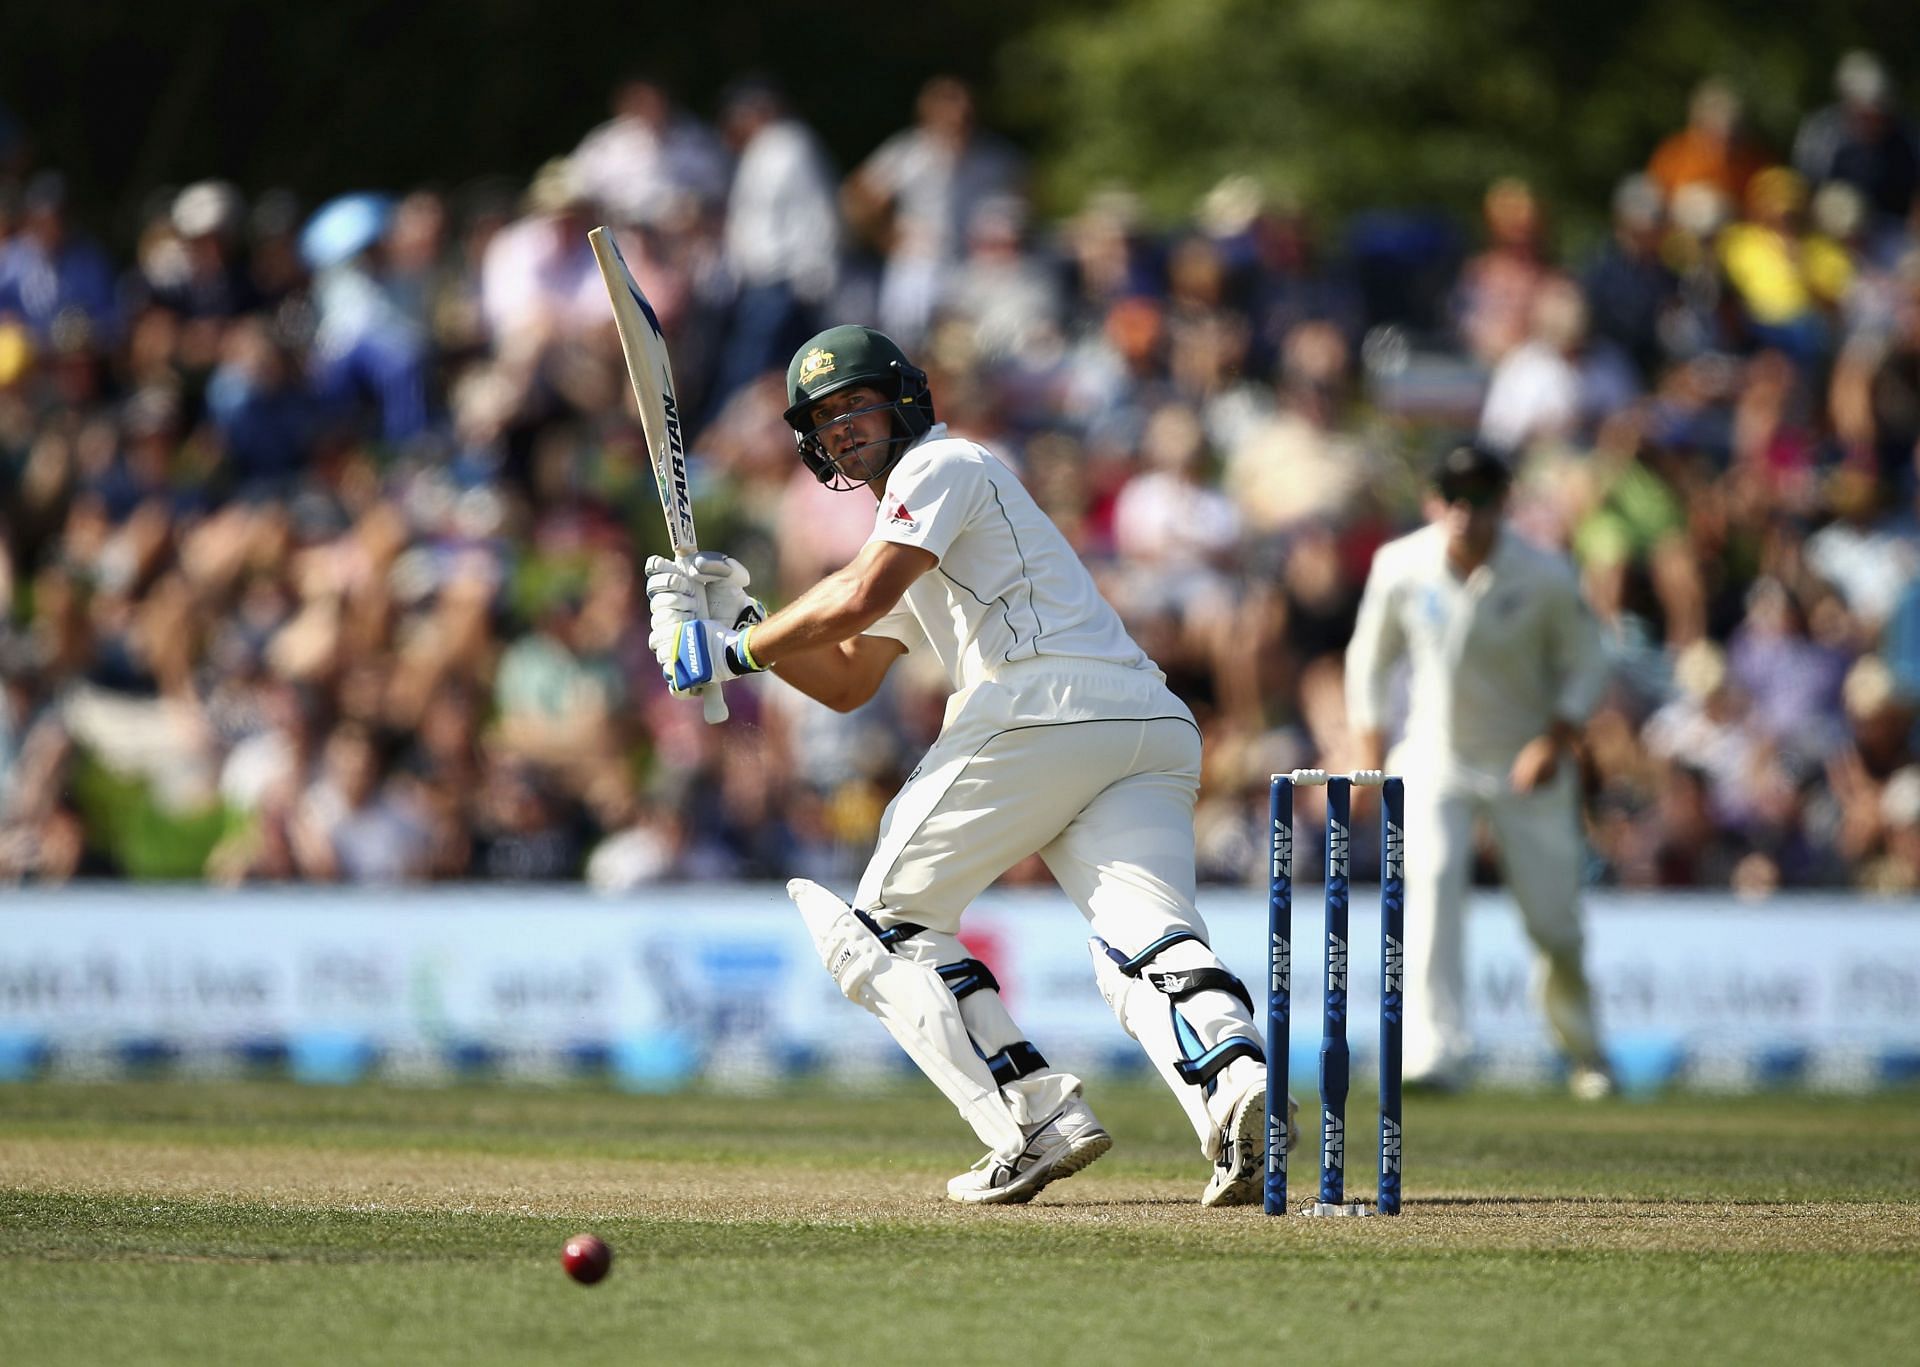 Joe Burns of Australia bats during day one of the Test match between New Zealand and Australia at Hagley Oval on February 20, 2016, in Christchurch, New Zealand.